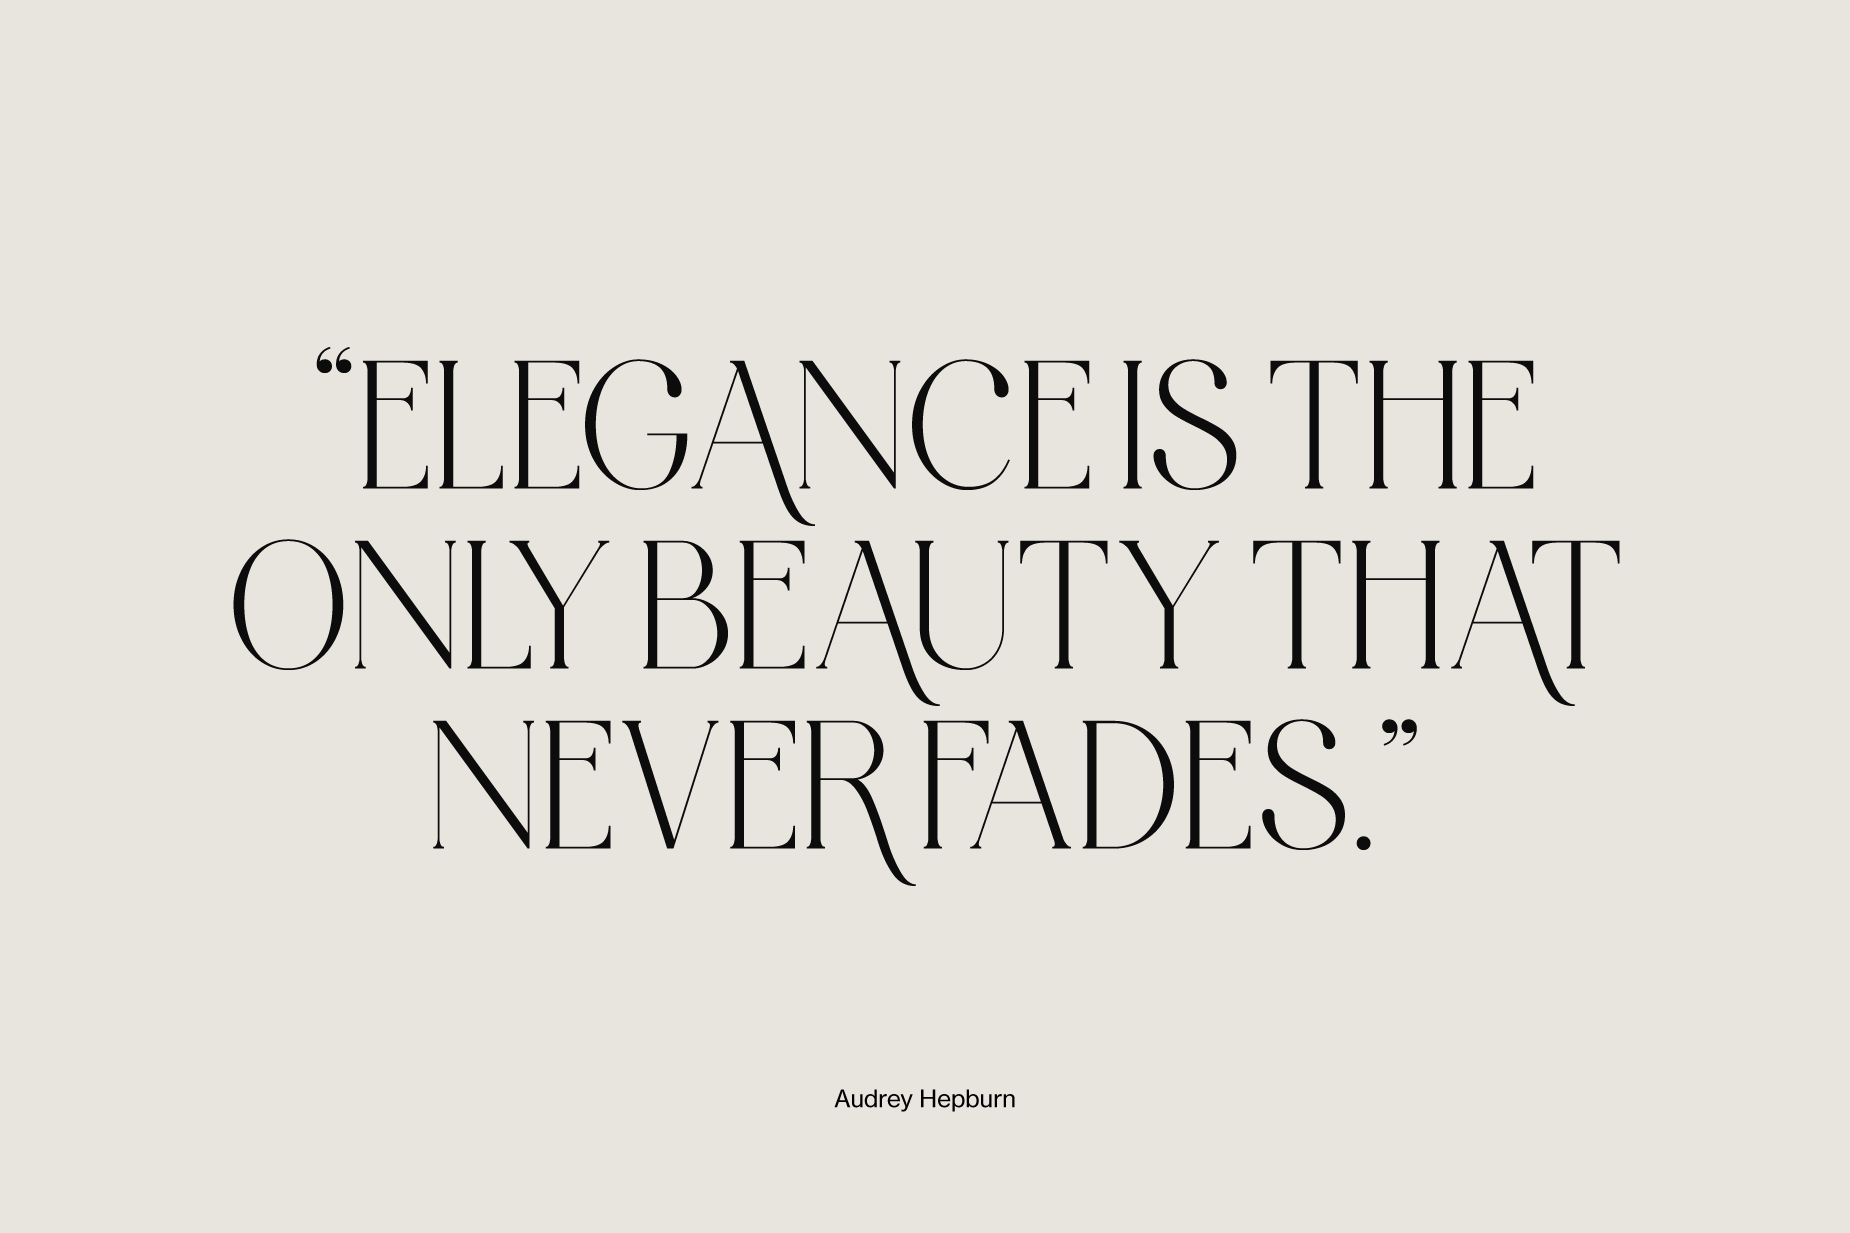 Audrey Hepburn Quote - Elegance is the only beauty that never fades.